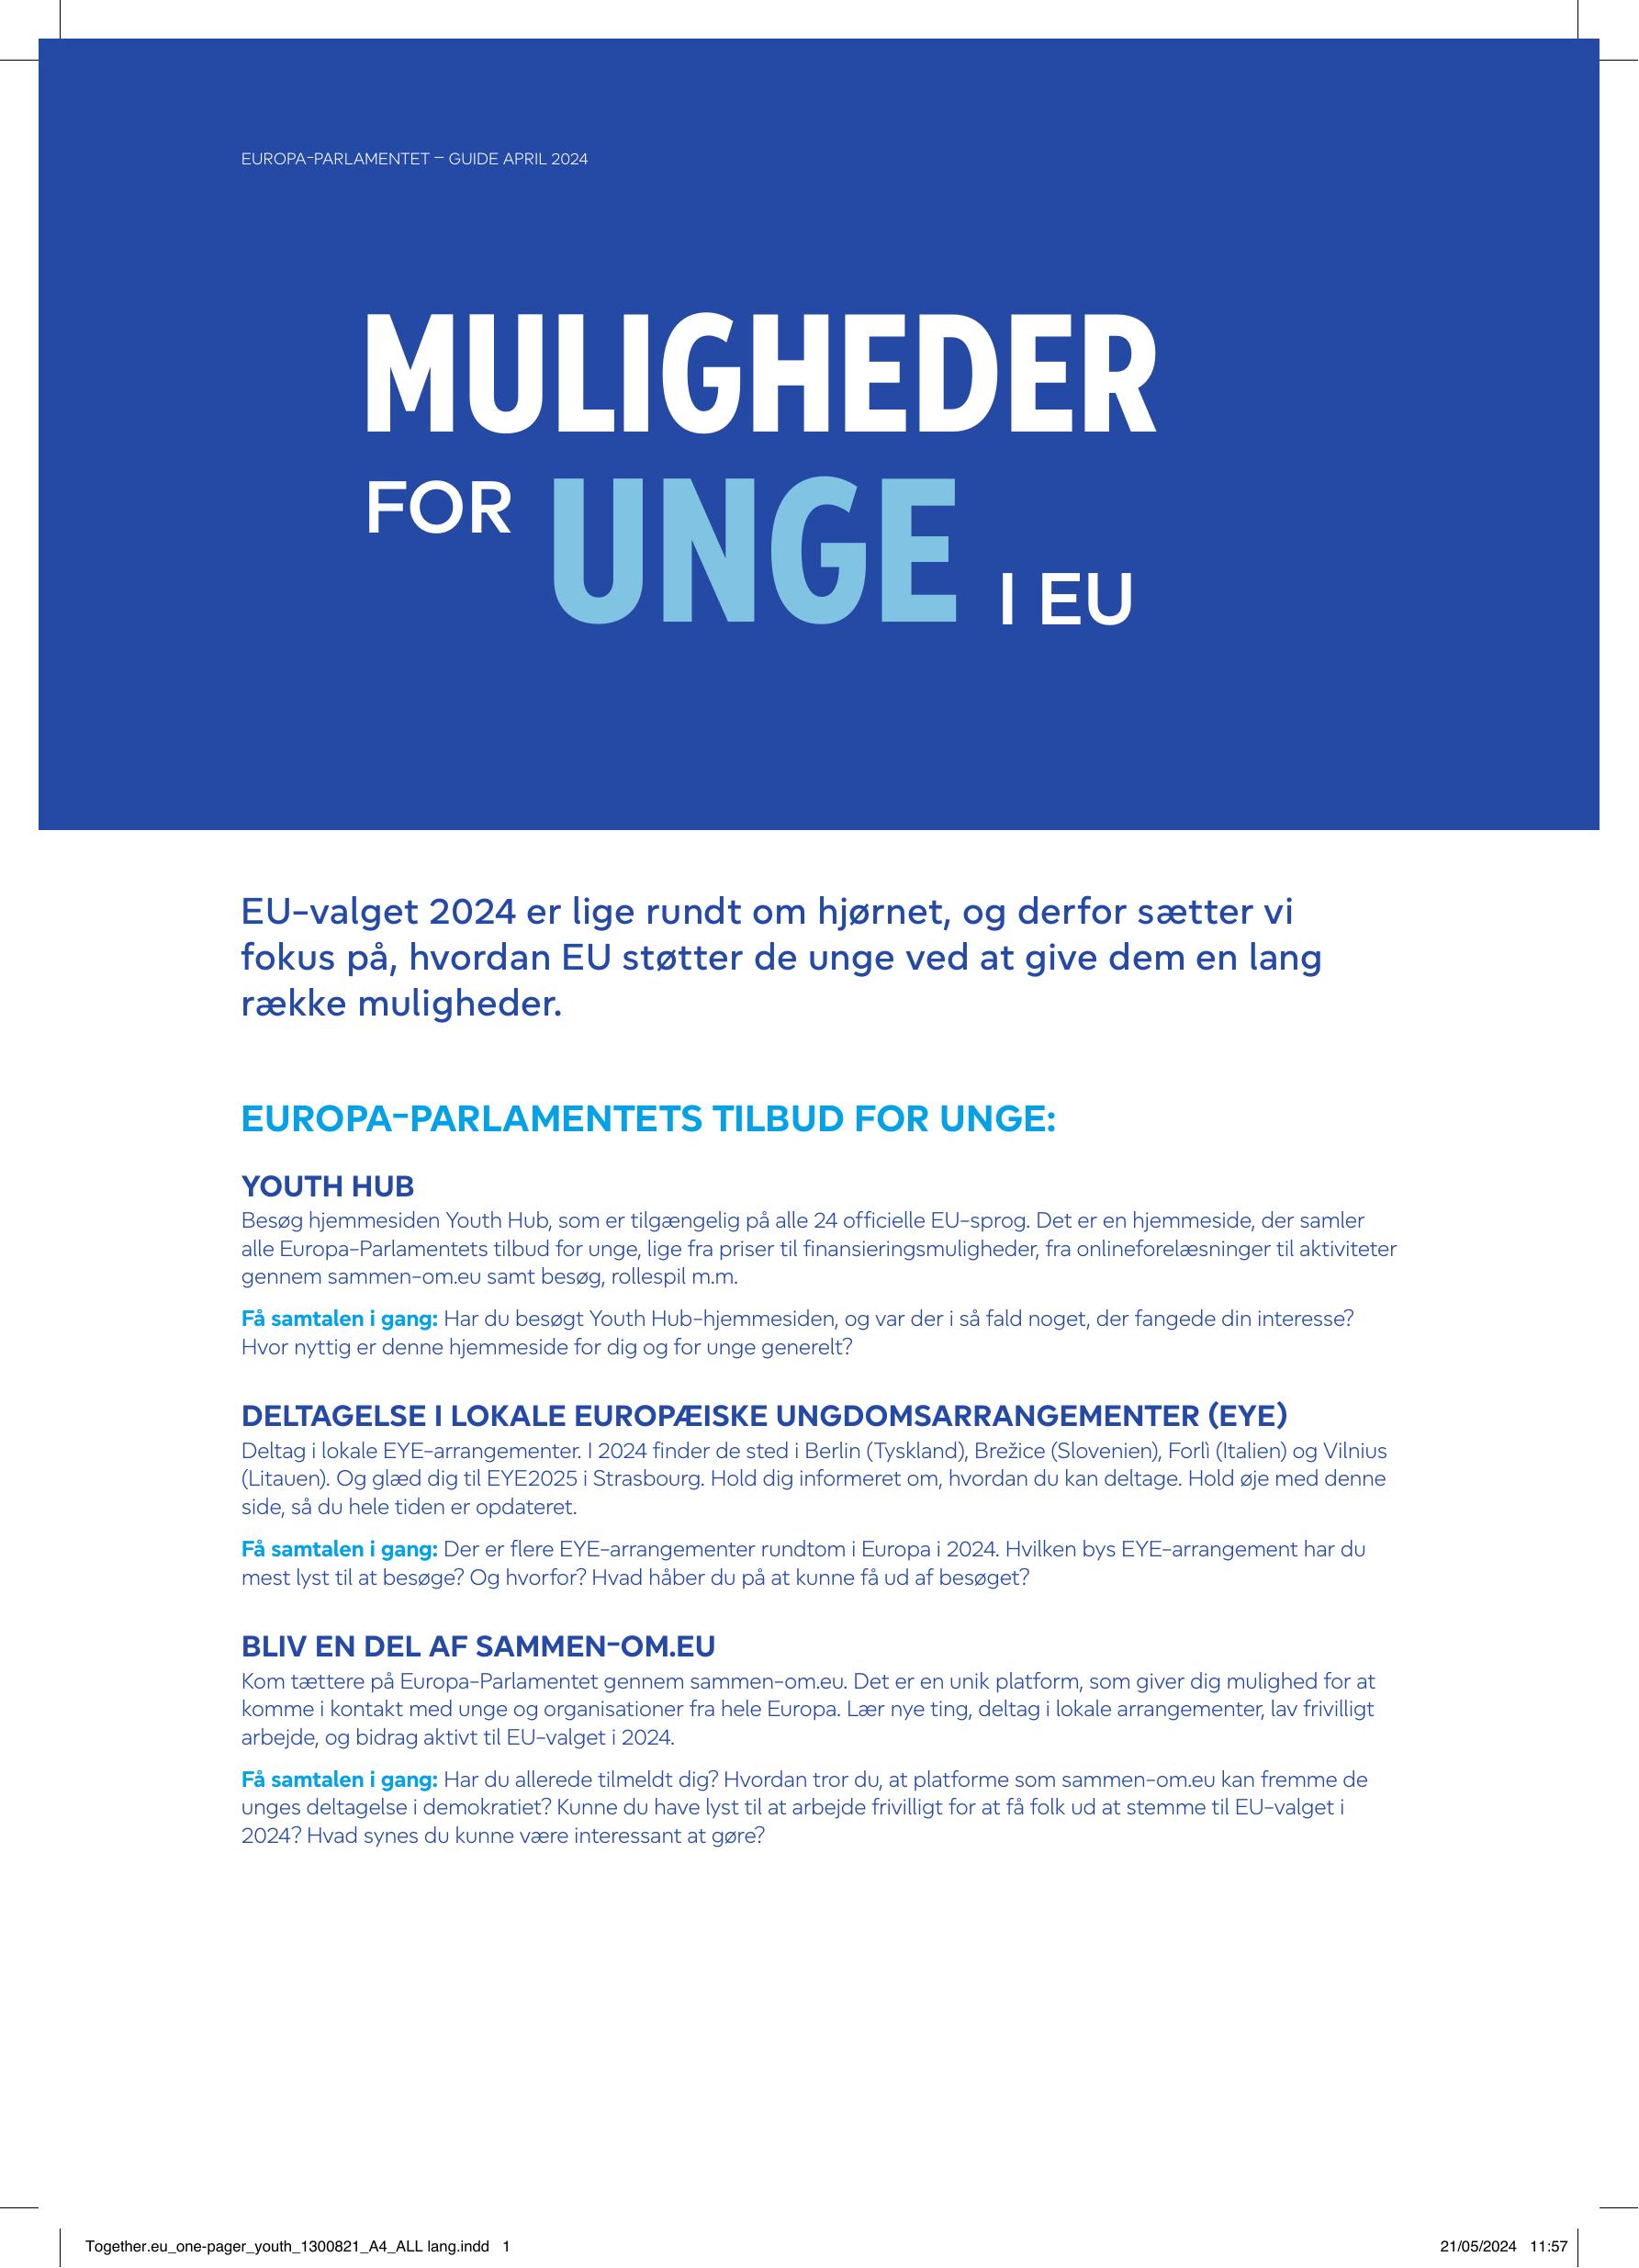 Together.eu_one-pager_youth_print.pdf